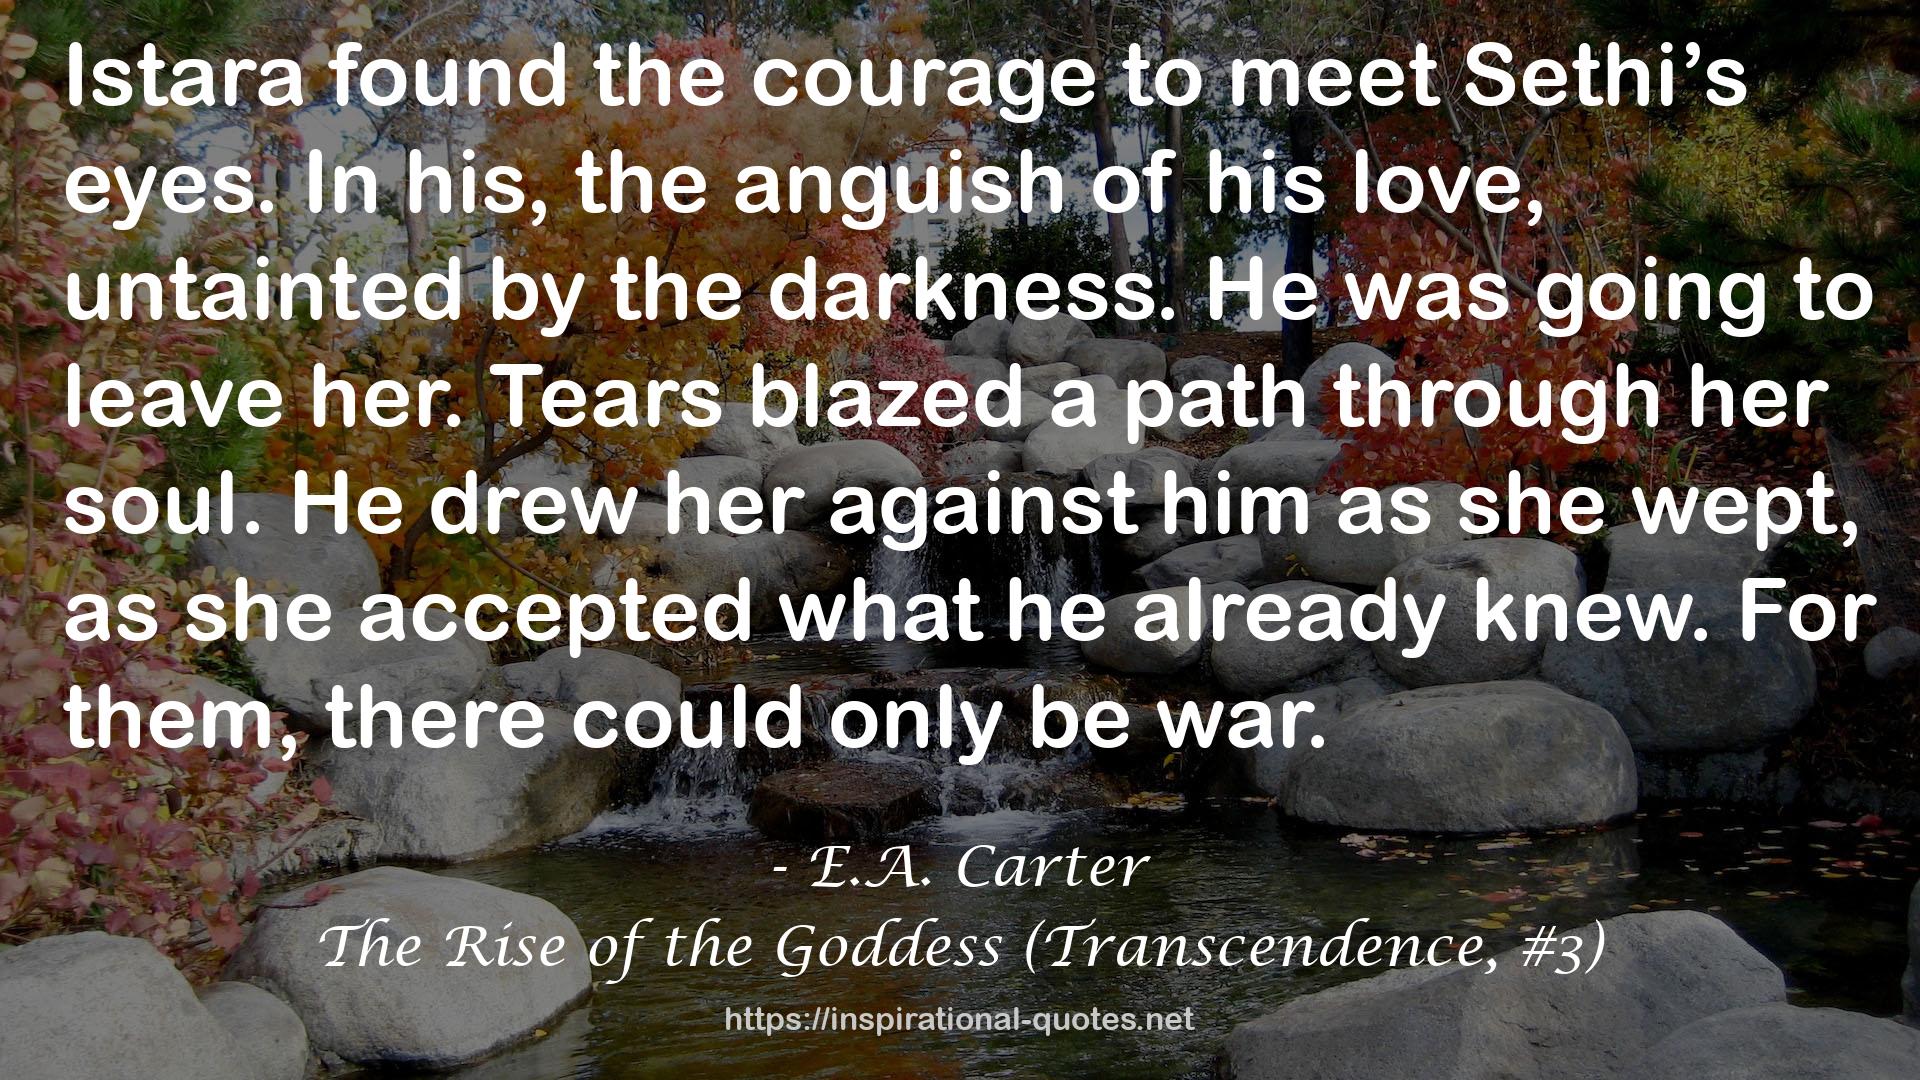 The Rise of the Goddess (Transcendence, #3) QUOTES